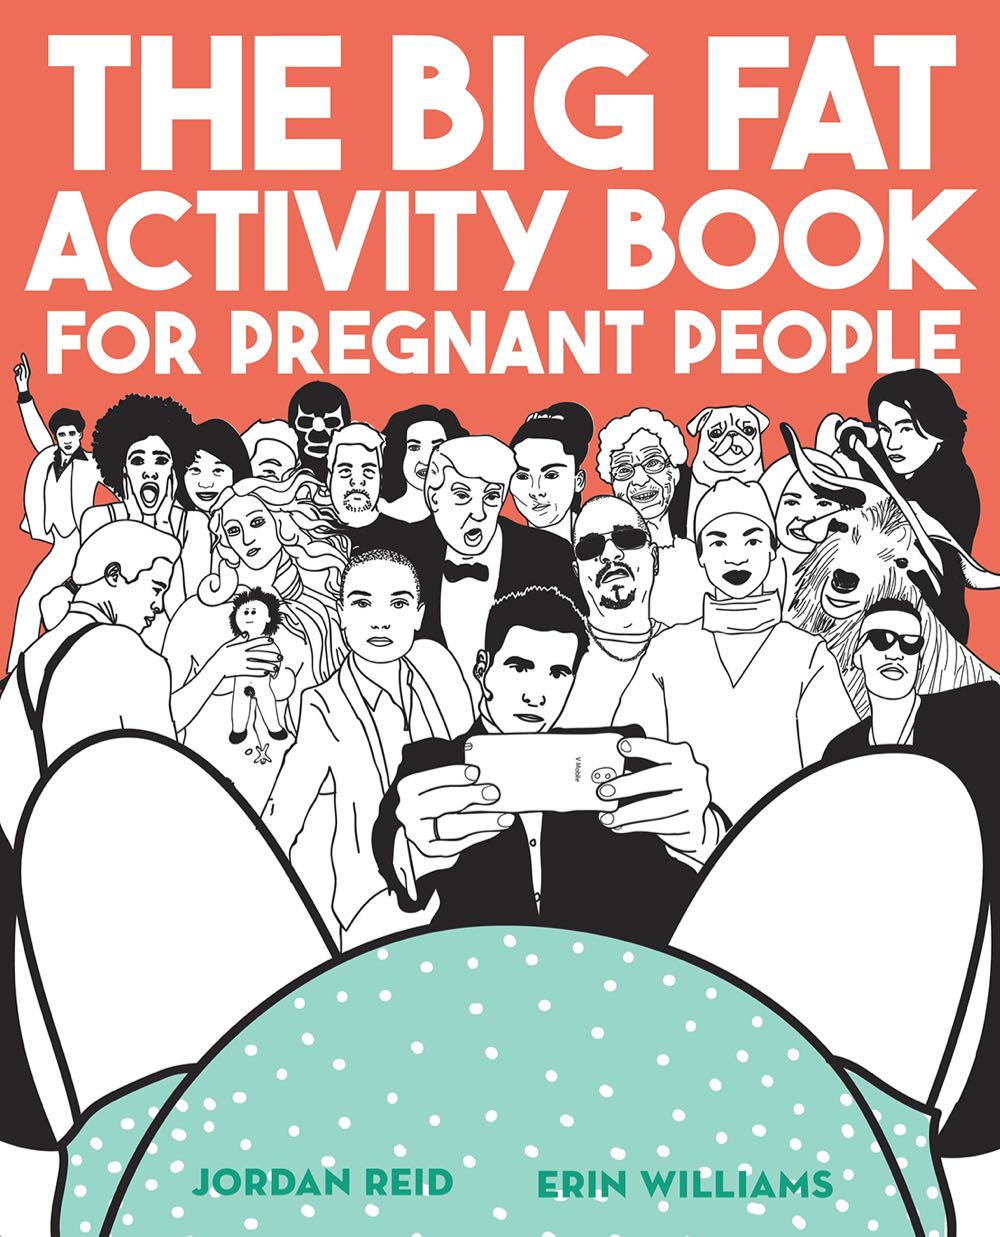 The Big Fat Activity Book For Pregnant People